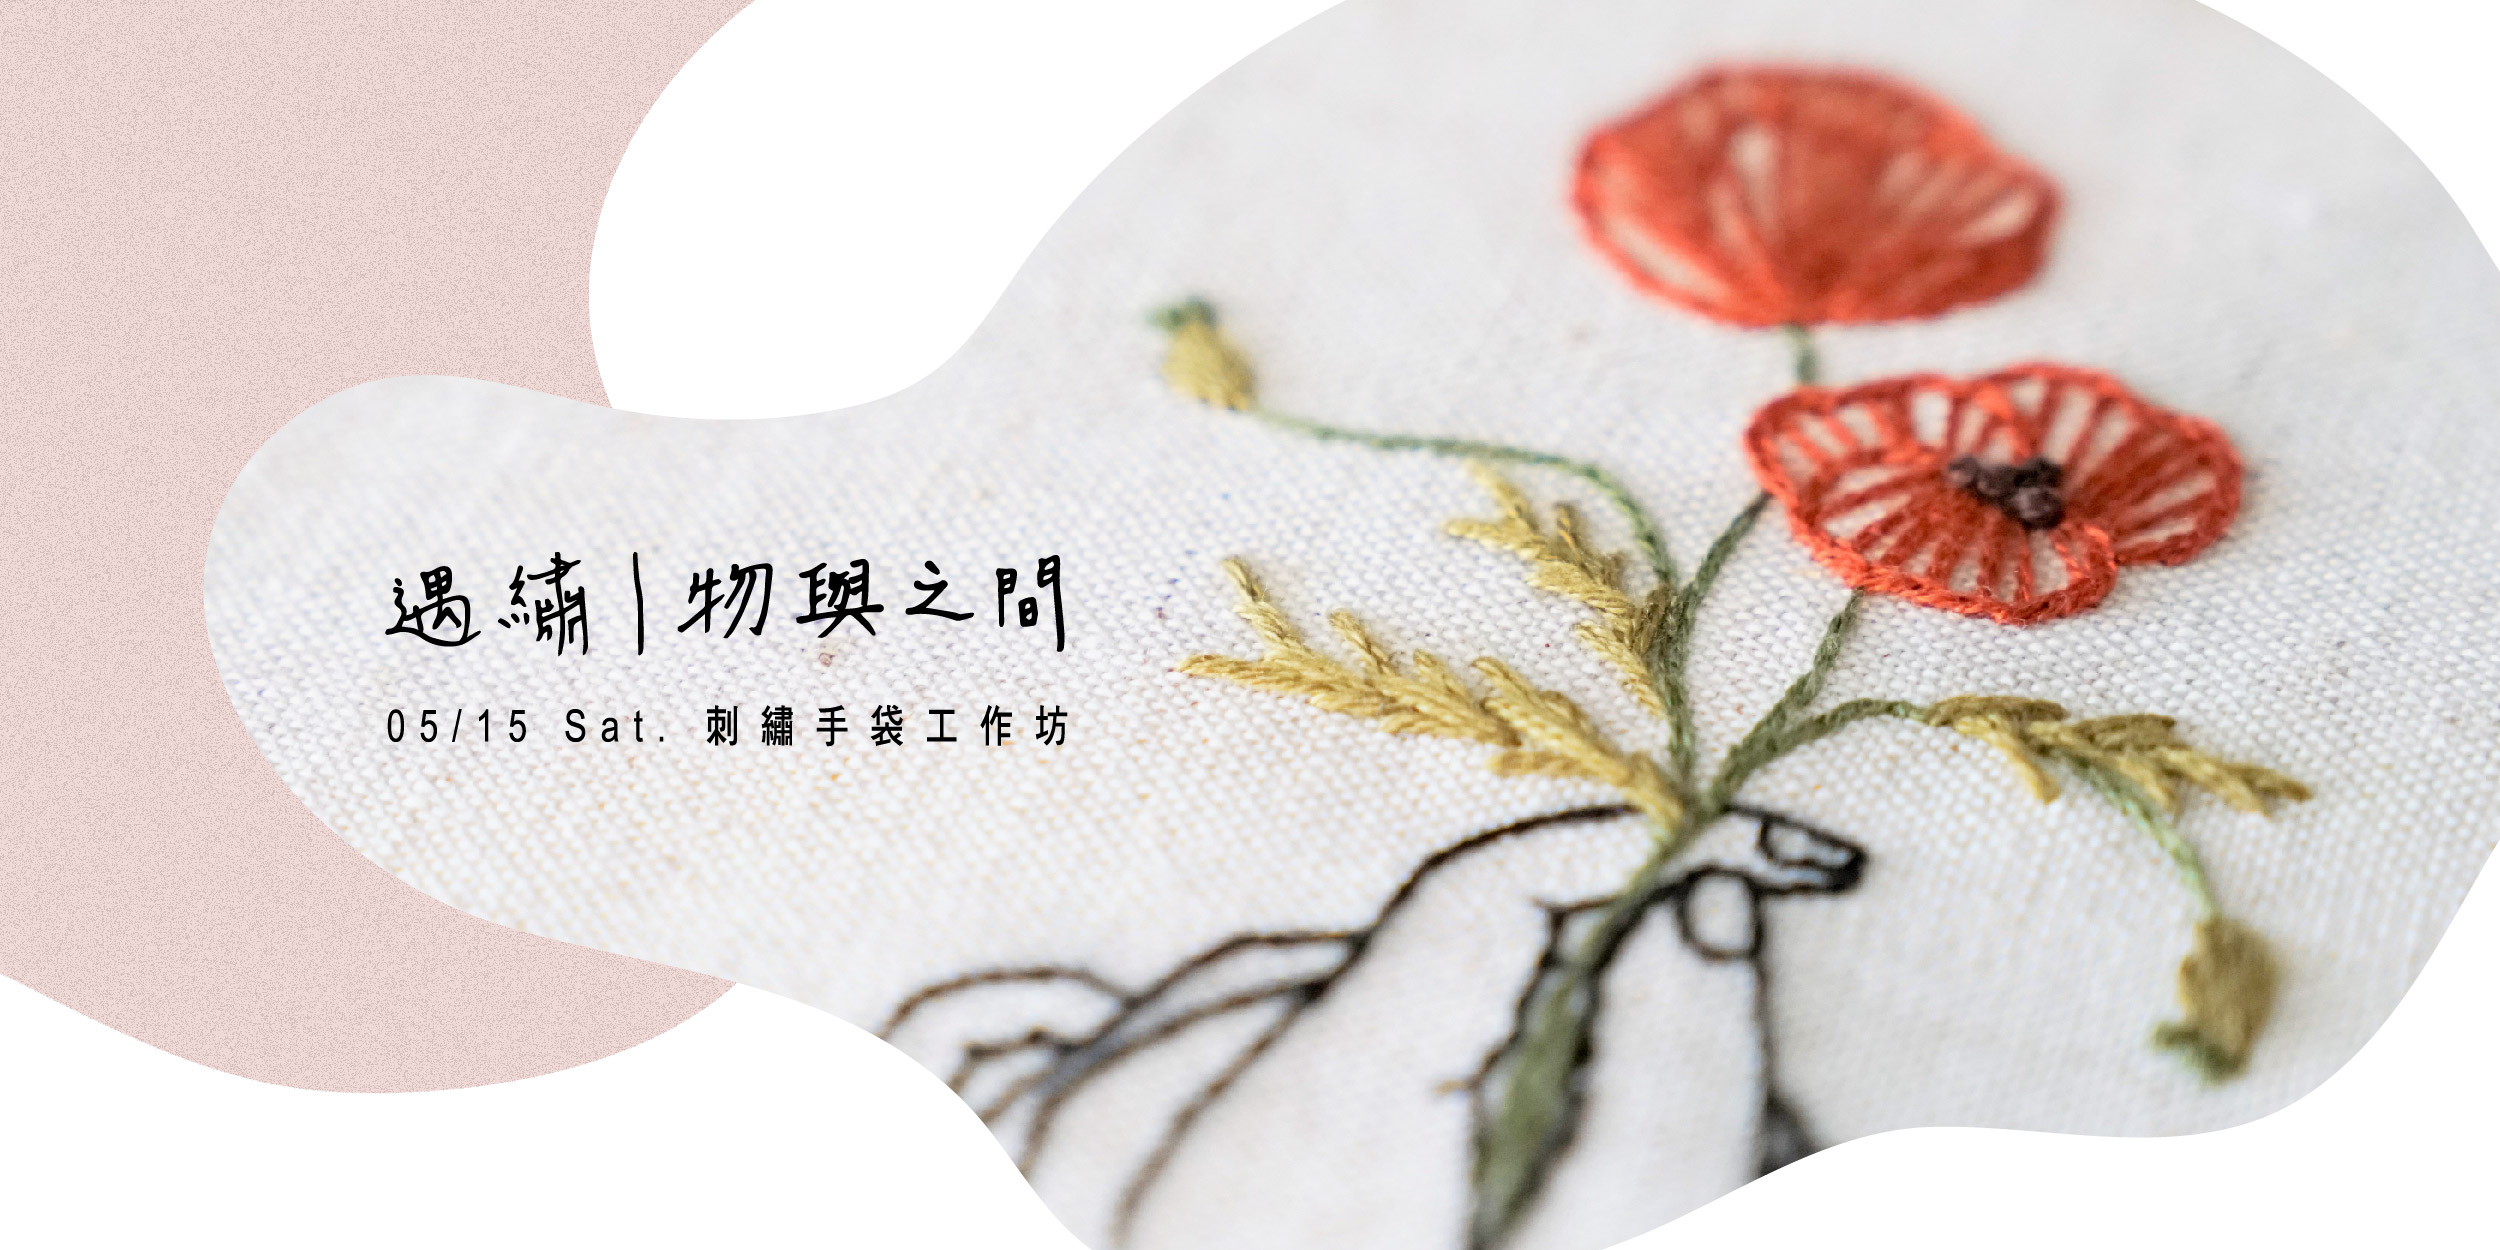 【Workshop】Encounter Embroidery | Objects and In Between—Handbag Embroidery Wor (Canceled)